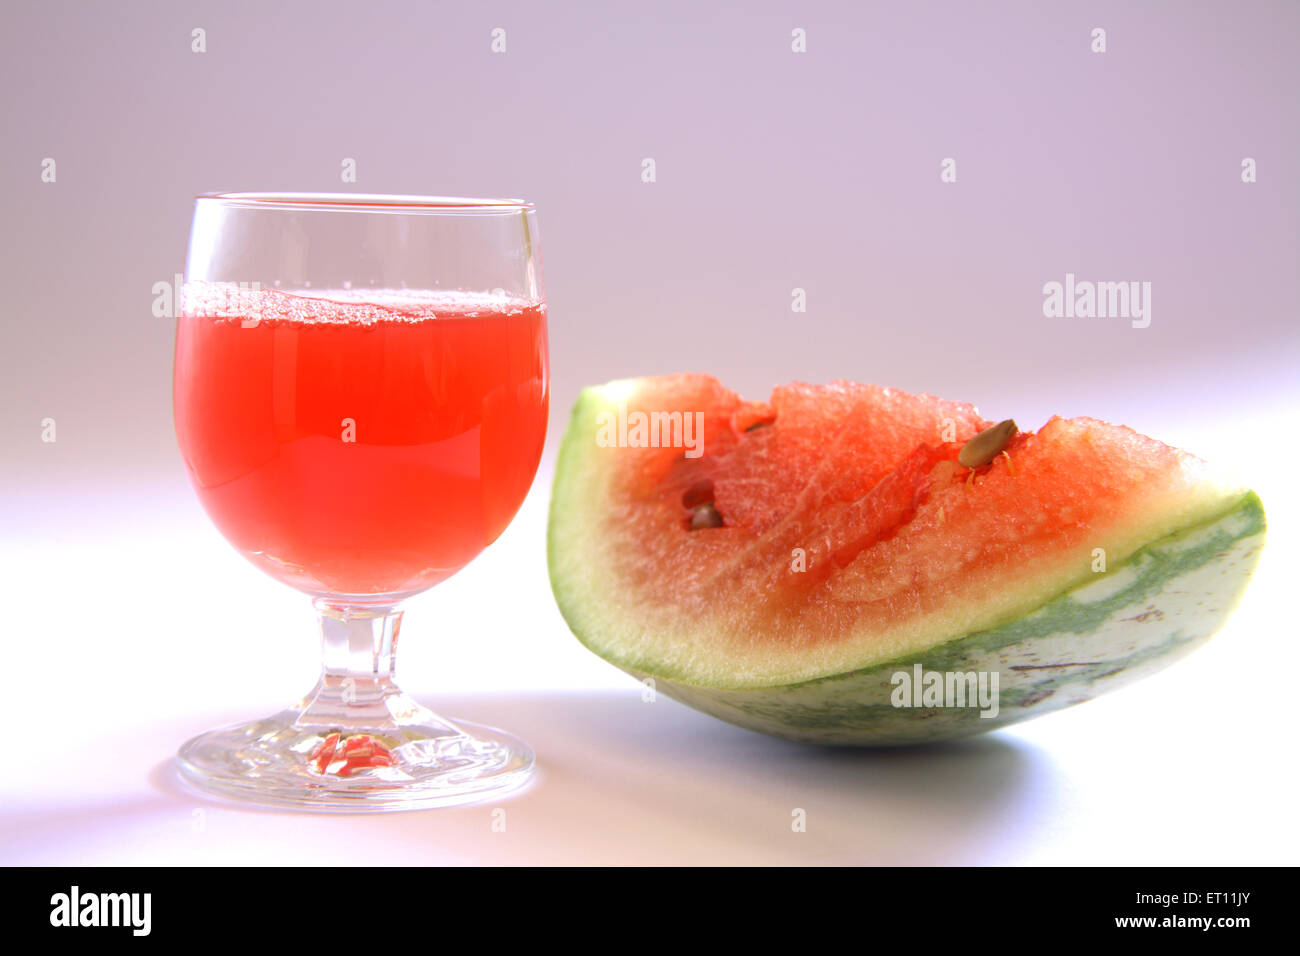 Fruit and drinks ; slice and juice of watermelon in glass on white background Stock Photo